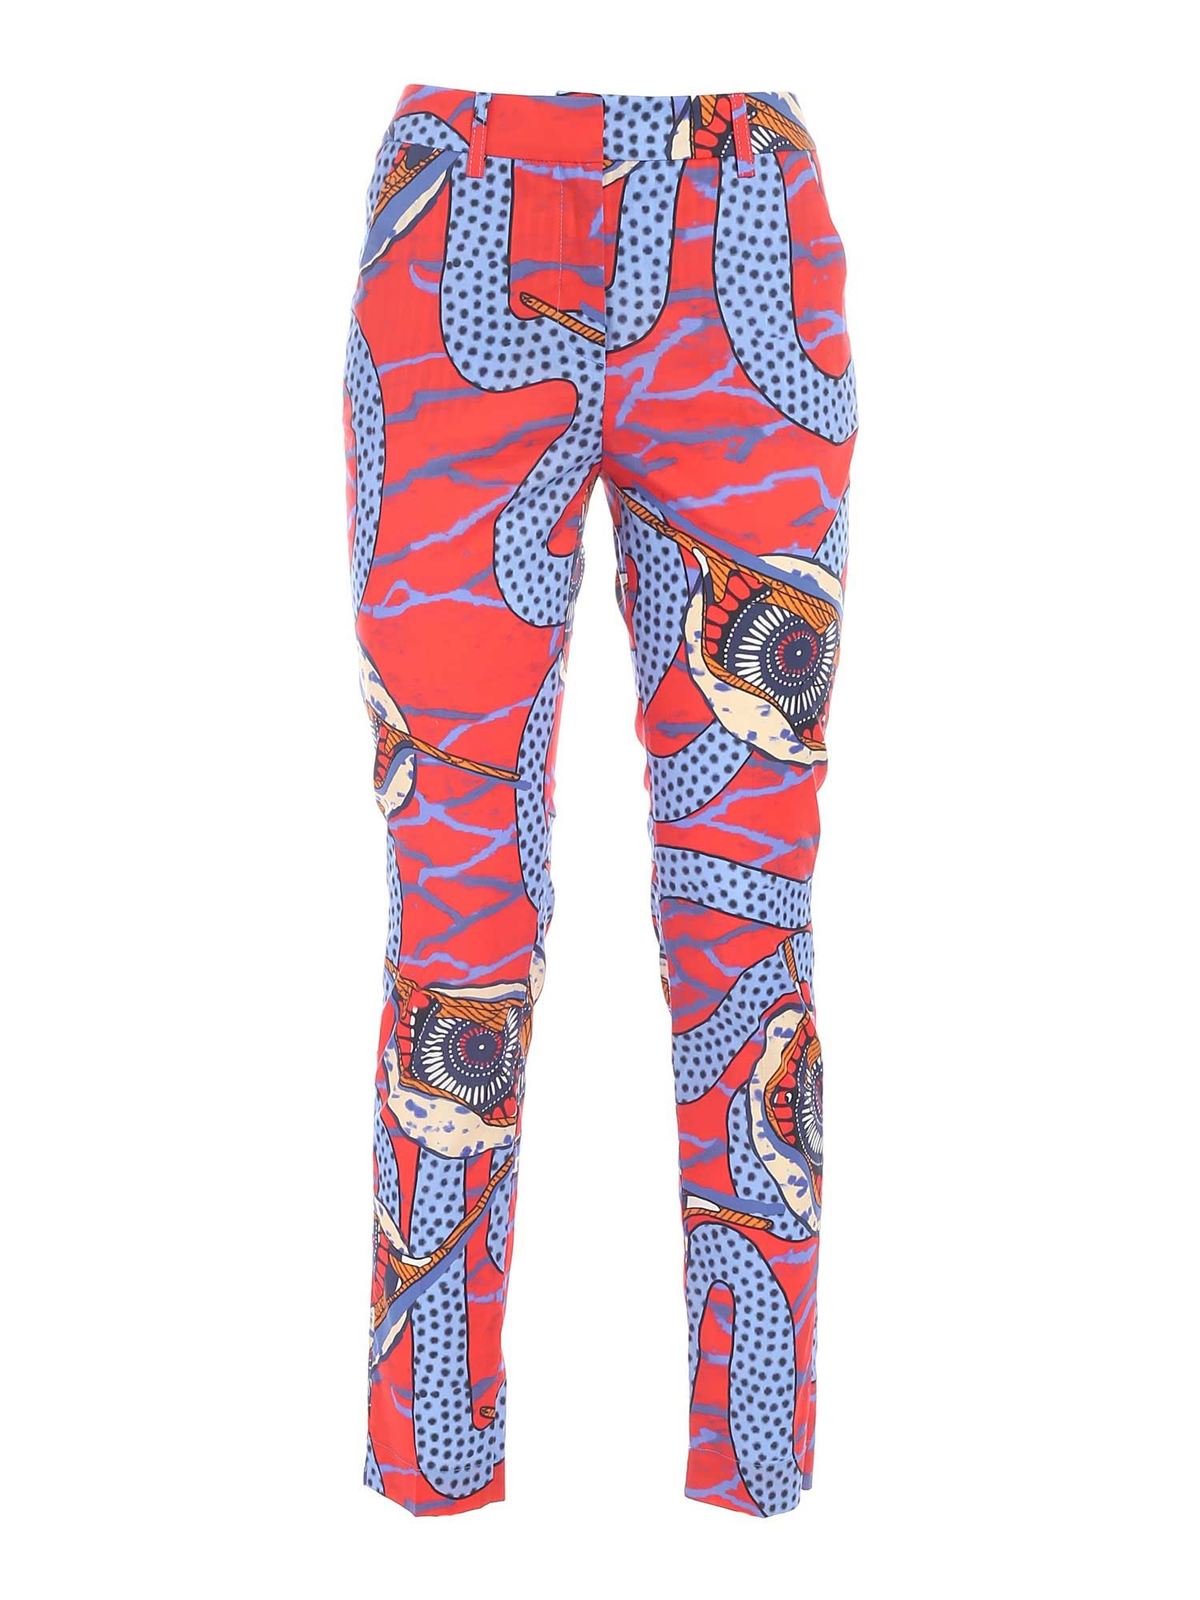 STELLA JEAN SNAKE PRINT PANTS IN RED AND LIGHT BLUE